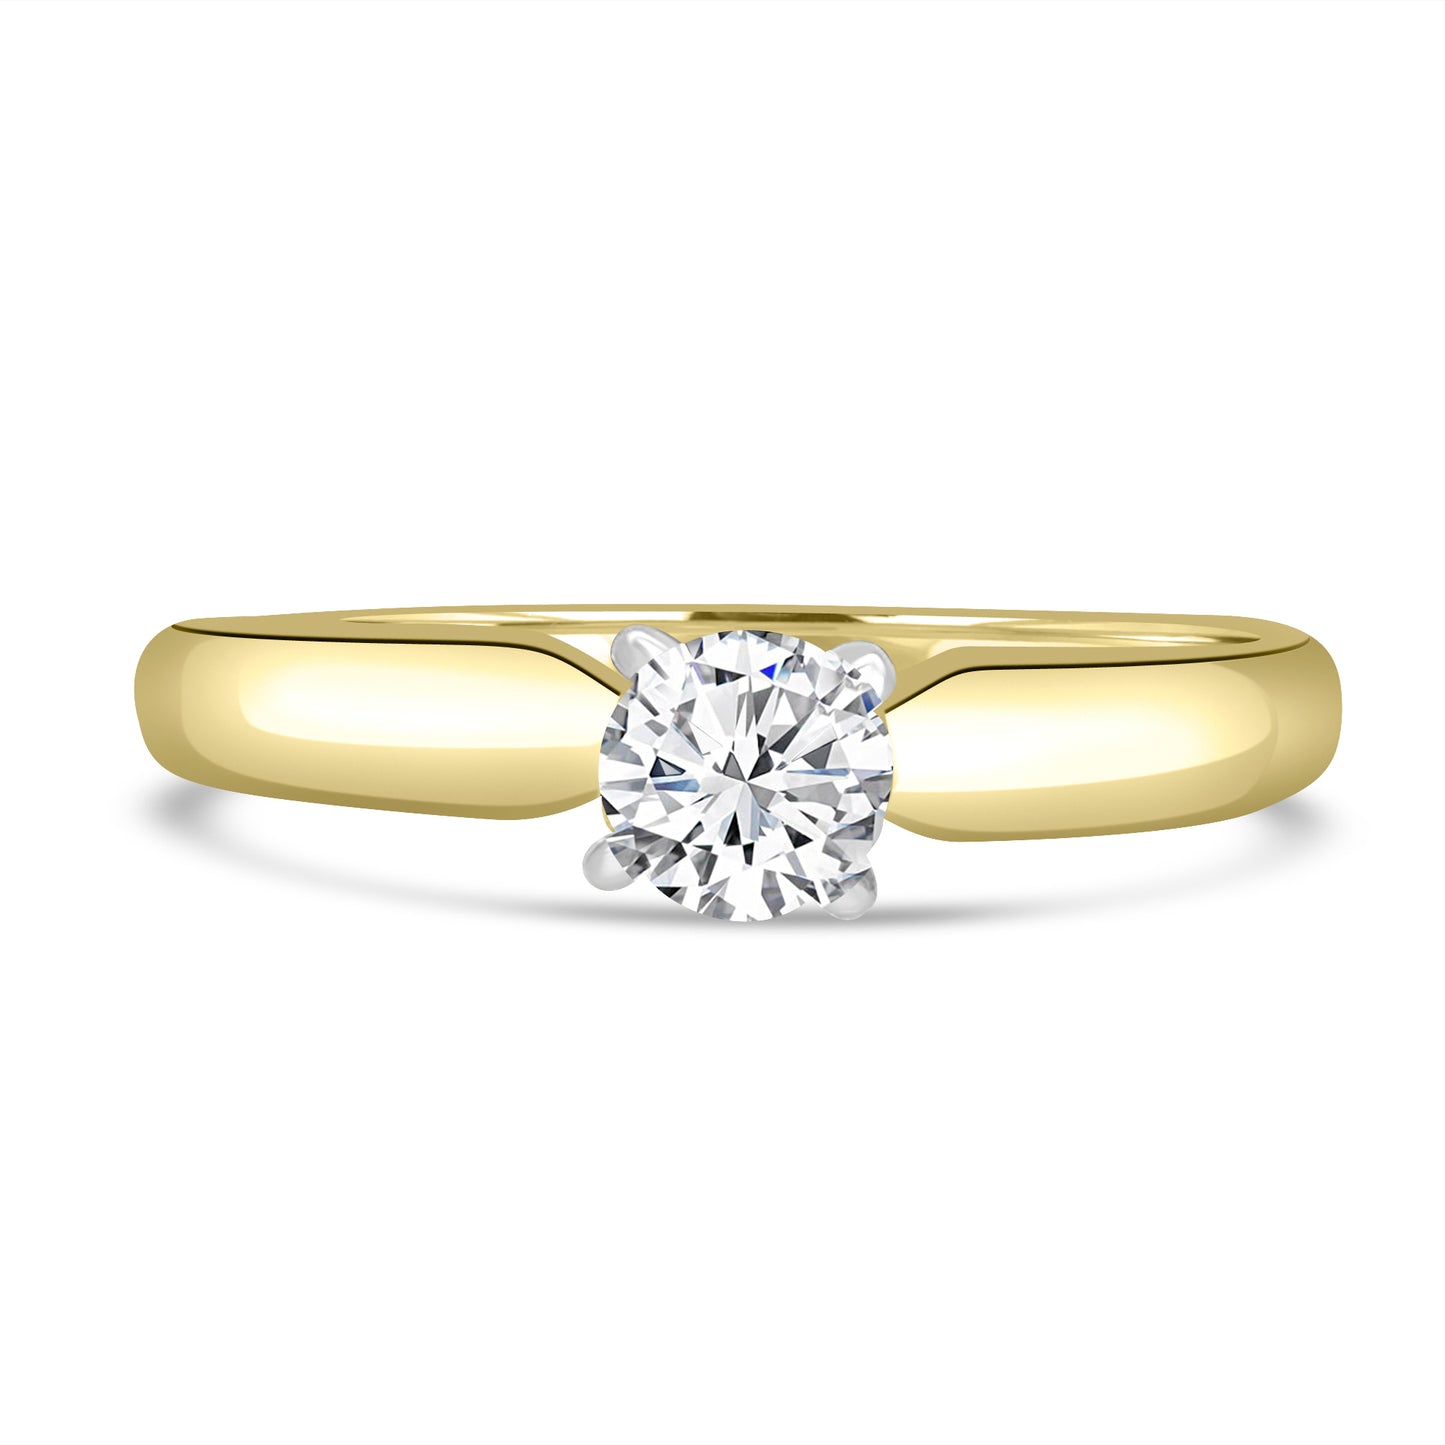 18ct Yellow Gold Round Brilliant Solitaire Ring 0.26ct